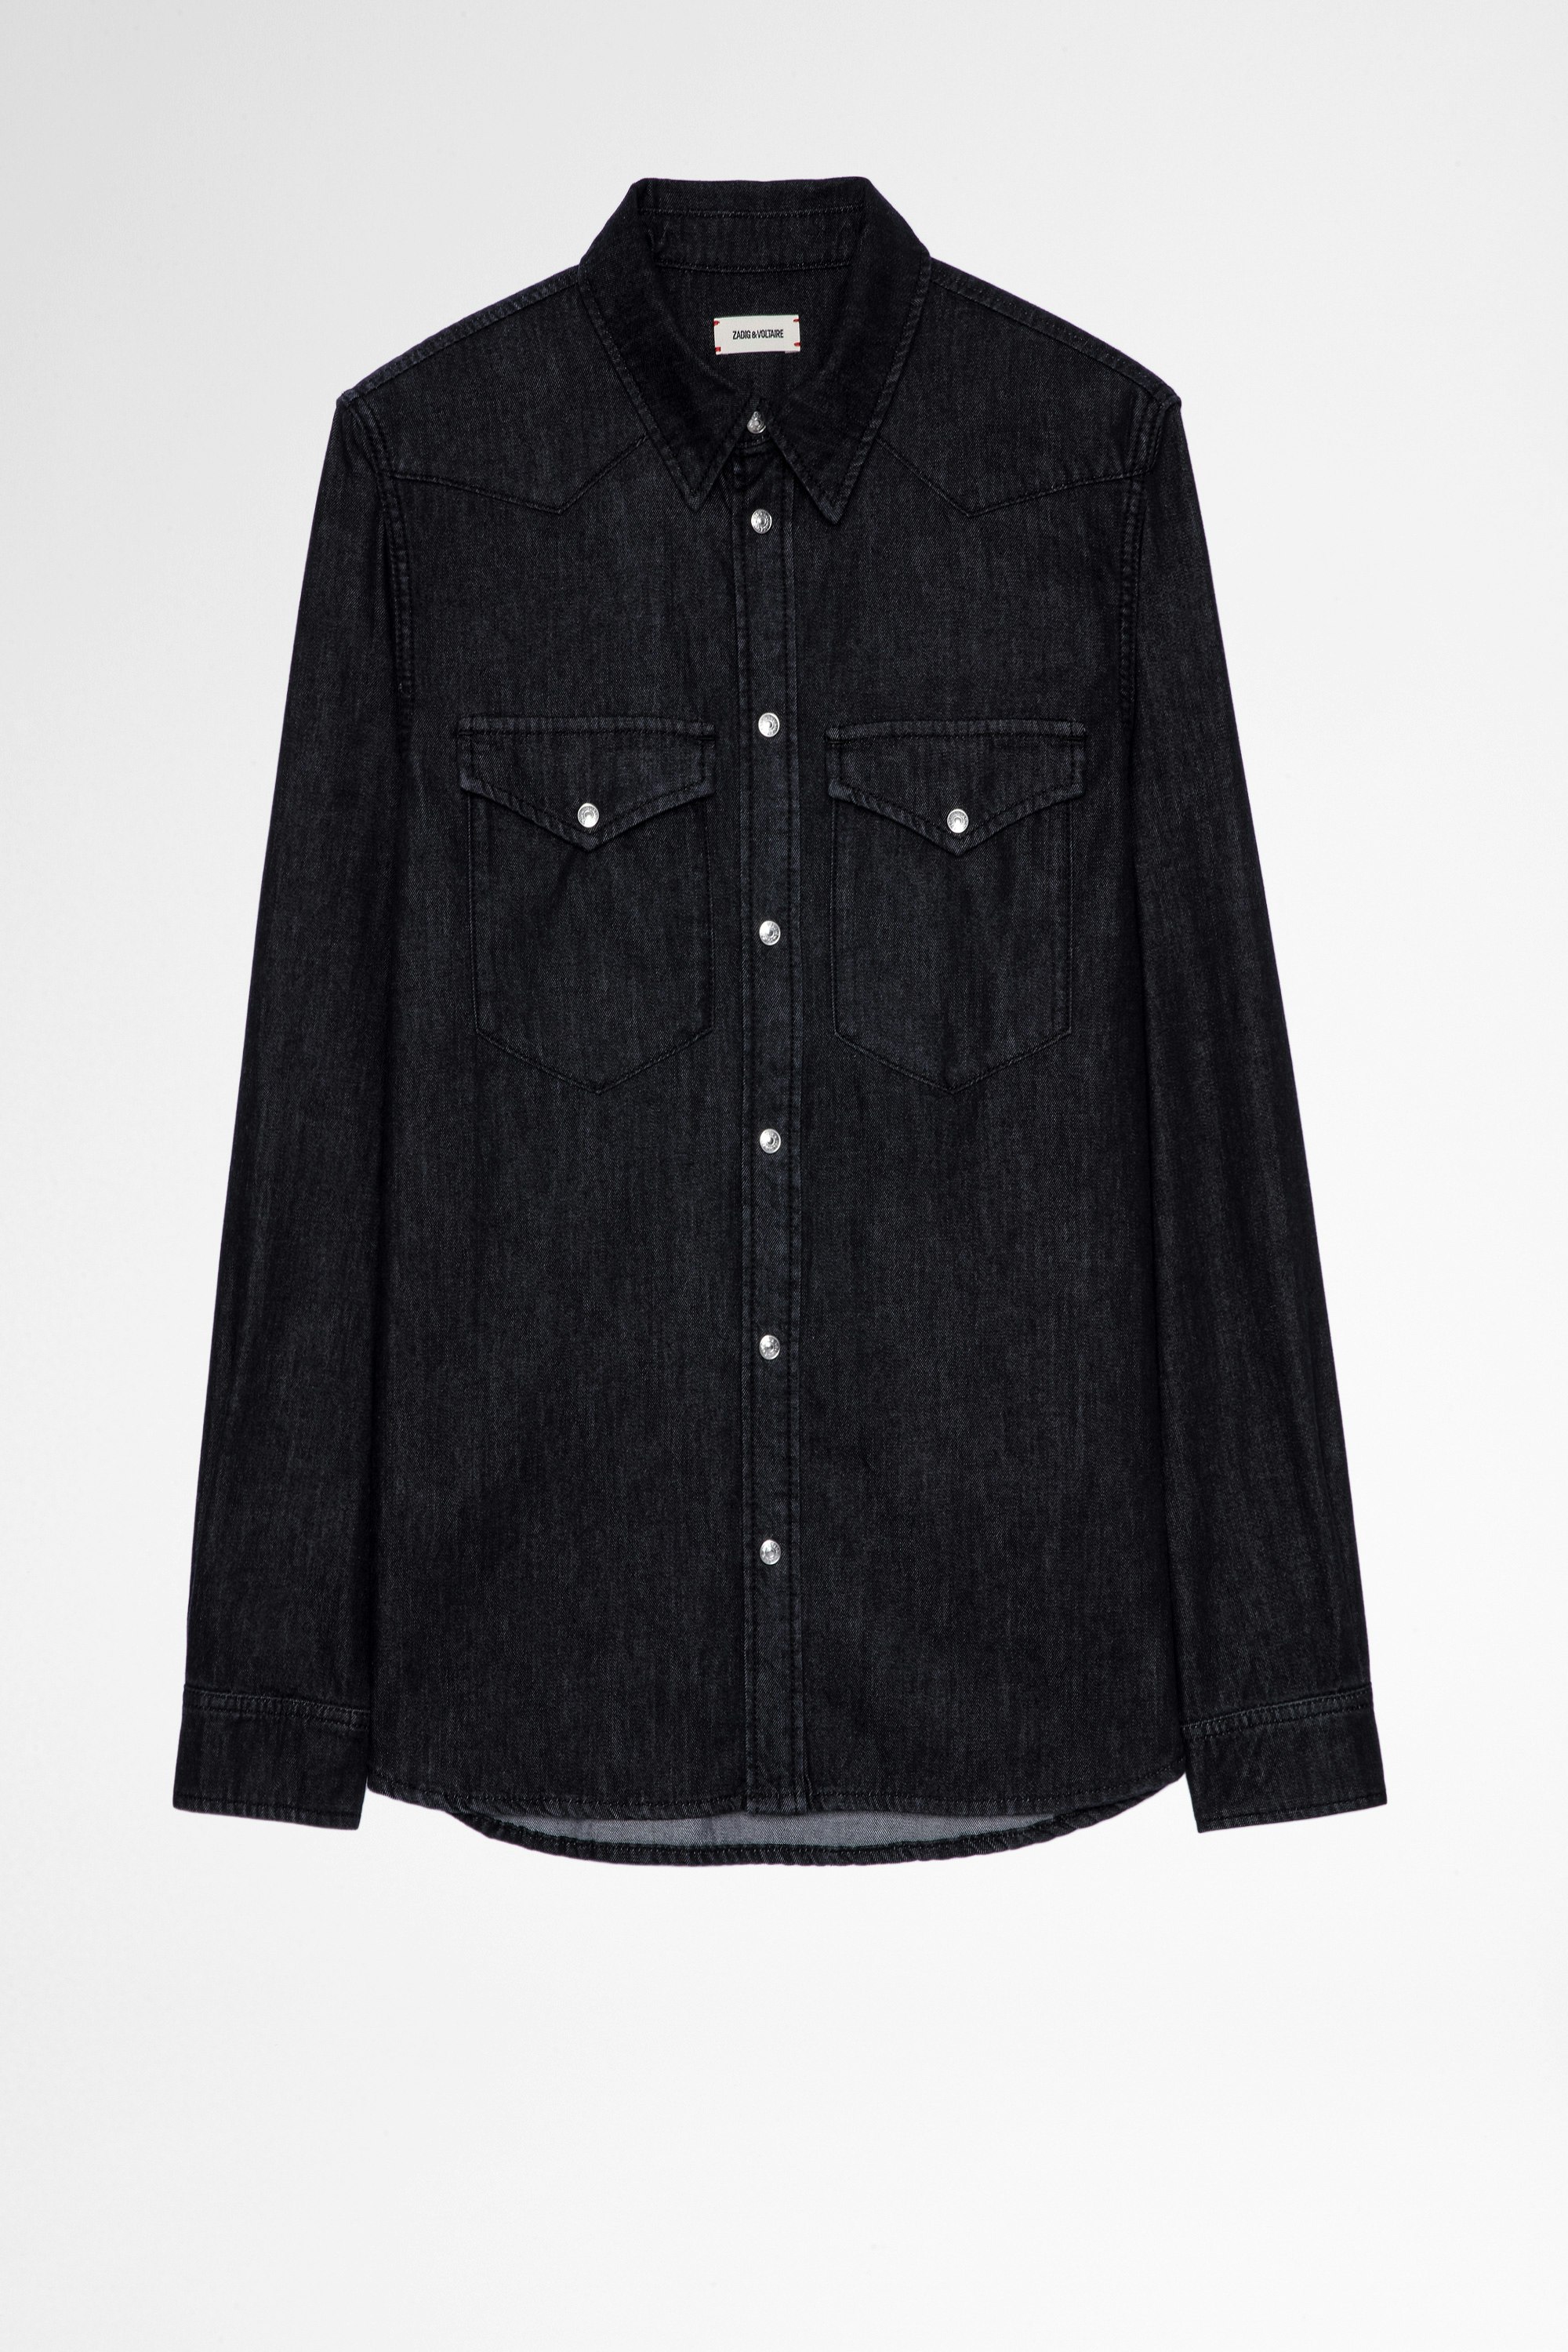 Stan Denim Shirt Men's Art Lover black cotton-denim shirt. This product is GOTS certified and made with fibers from organic farming.